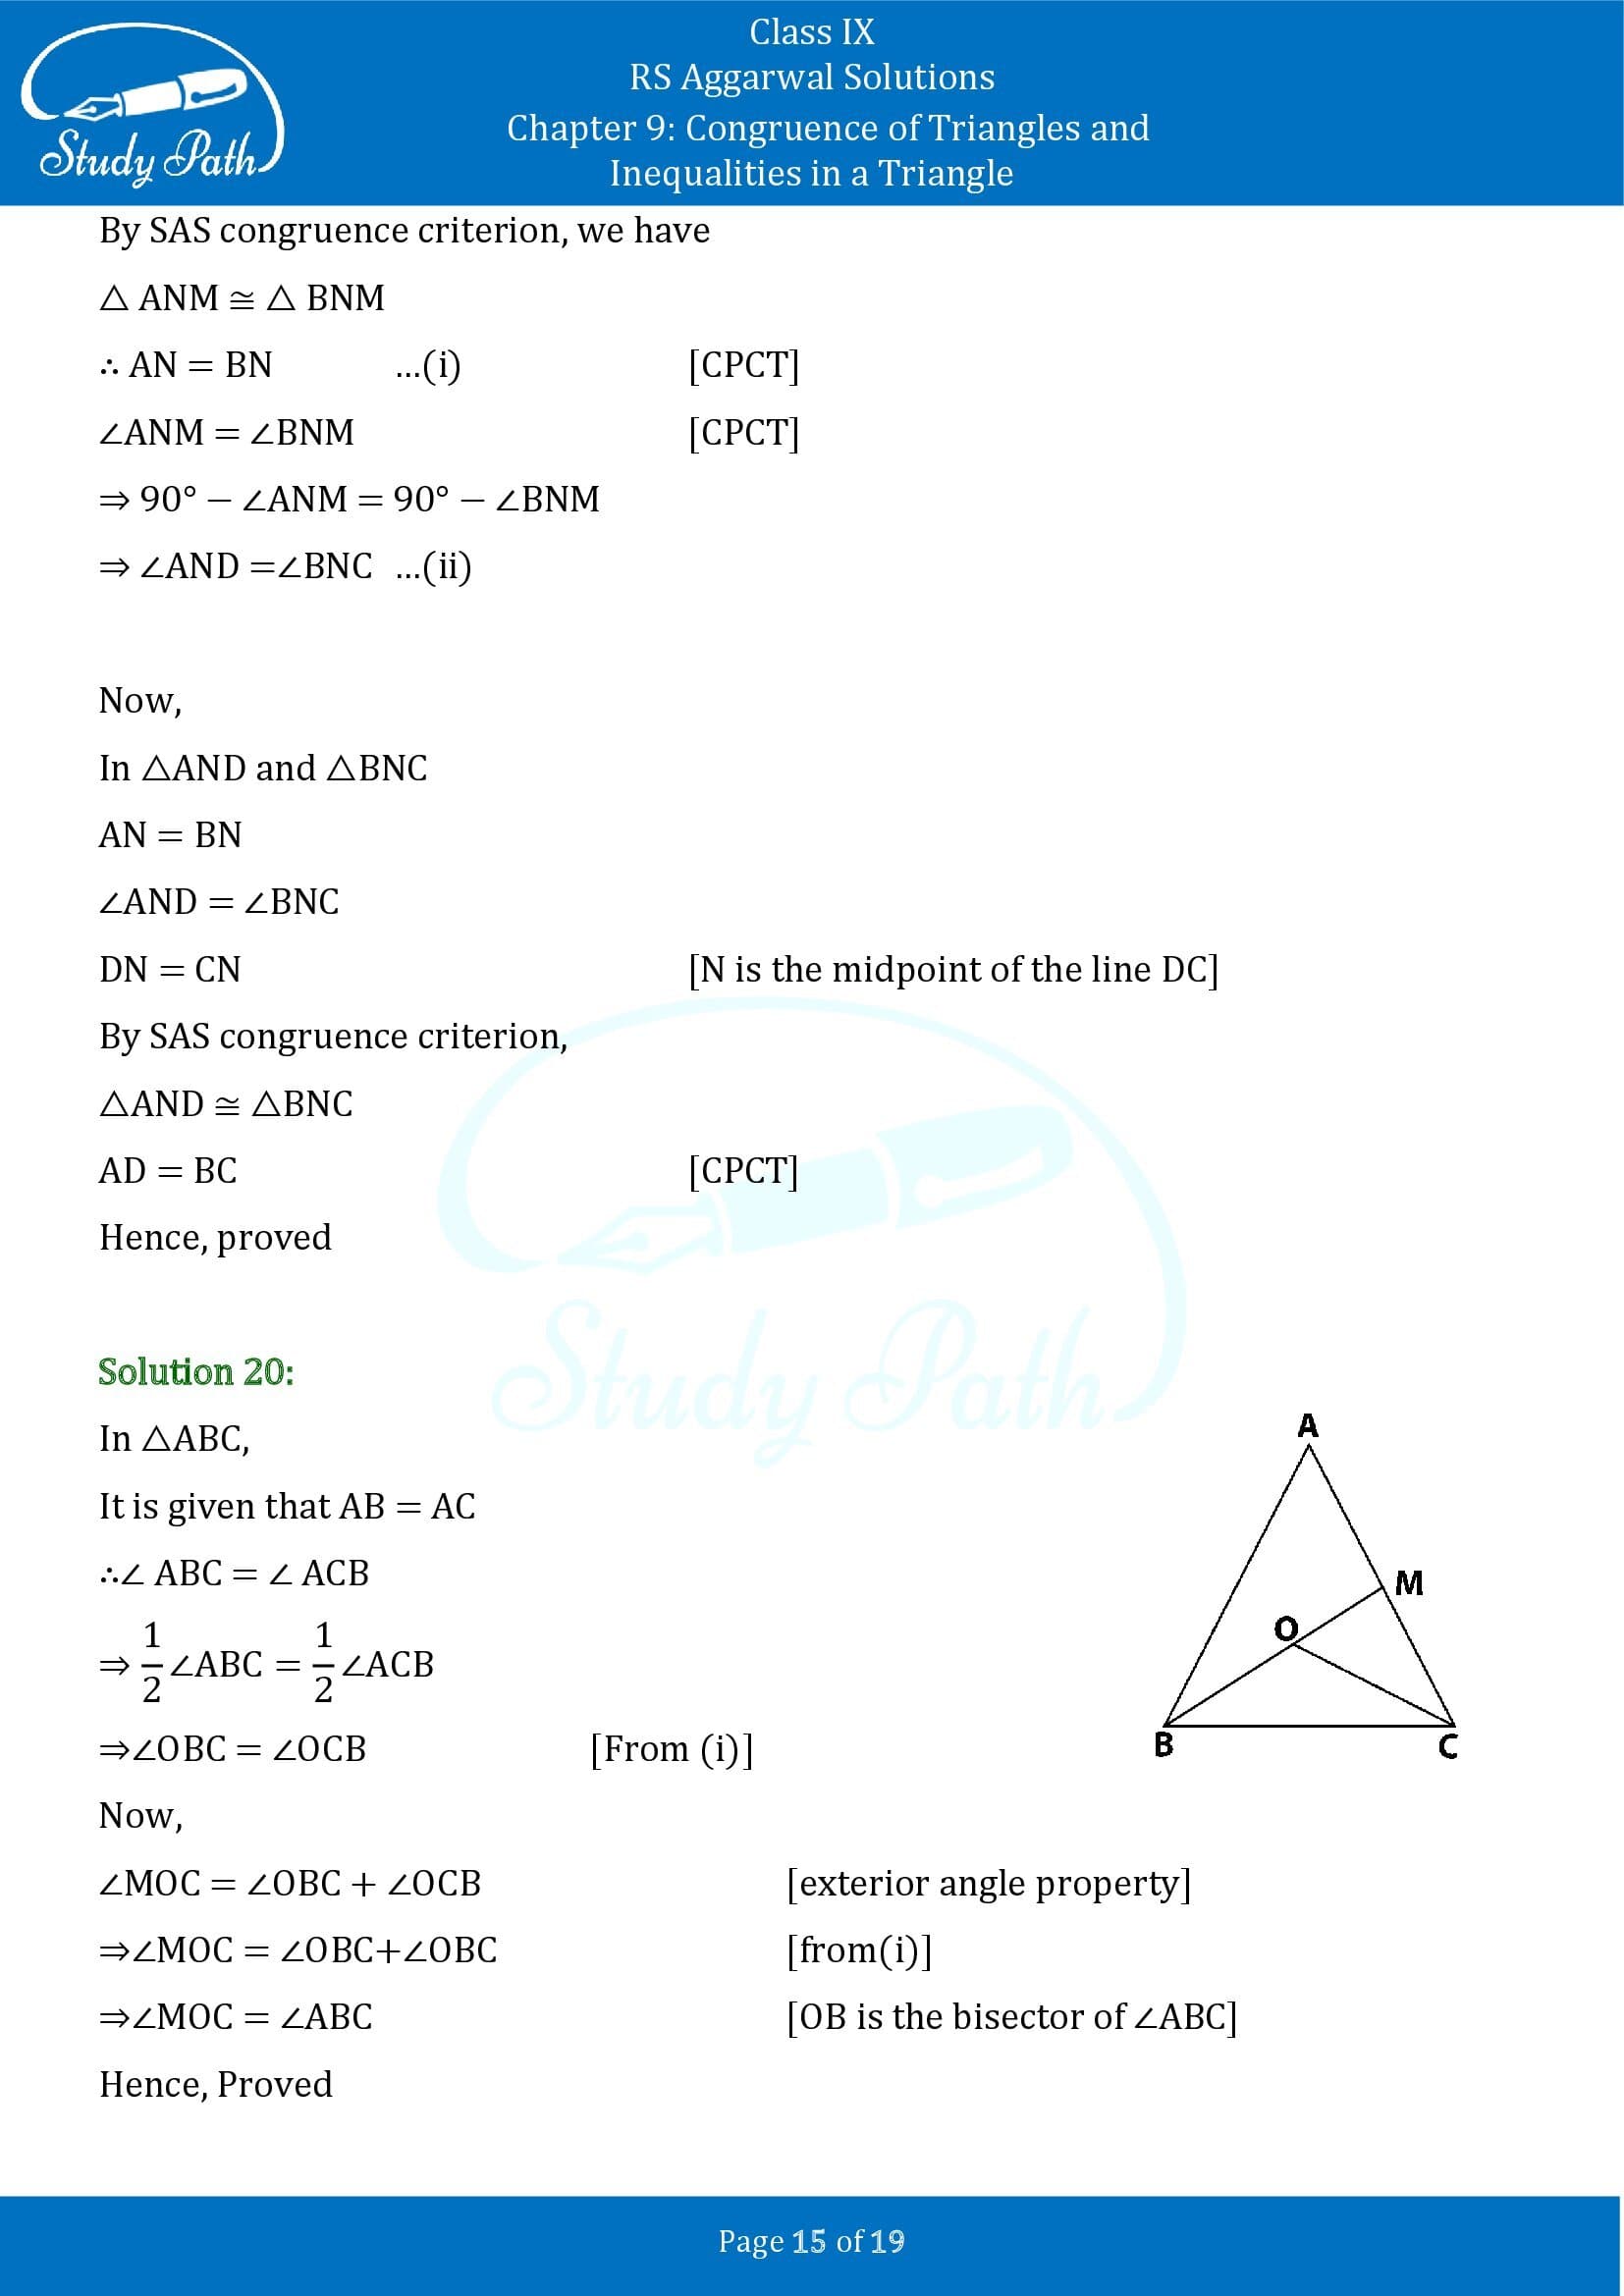 RS Aggarwal Solutions Class 9 Chapter 9 Congruence of Triangles and Inequalities in a Triangle Exercise 9A 0015